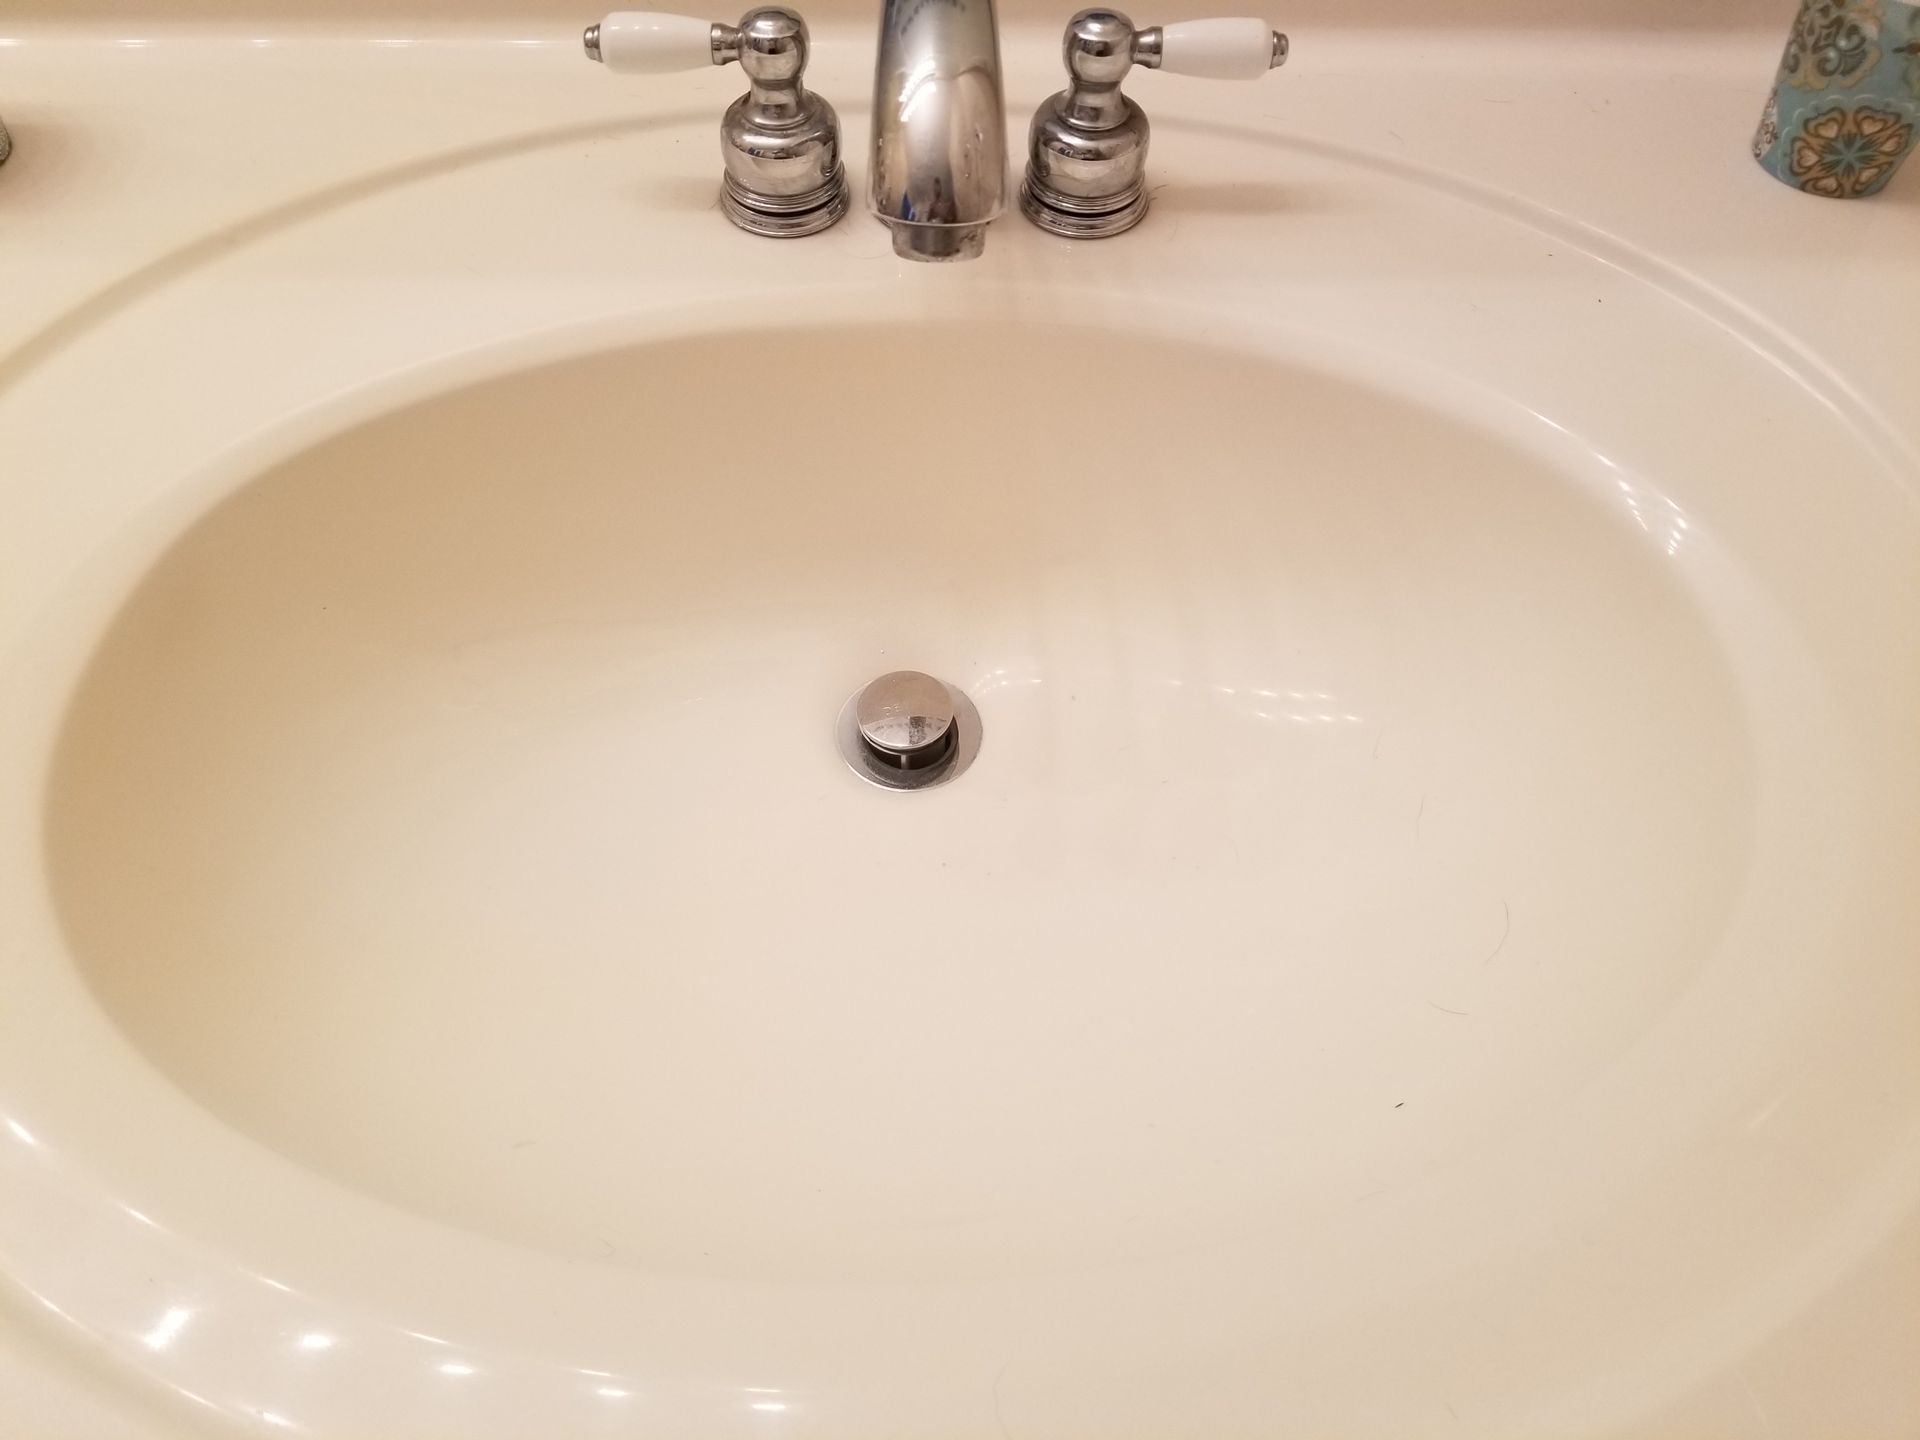 a bathroom sink with a faucet and soap dispenser on the counter .